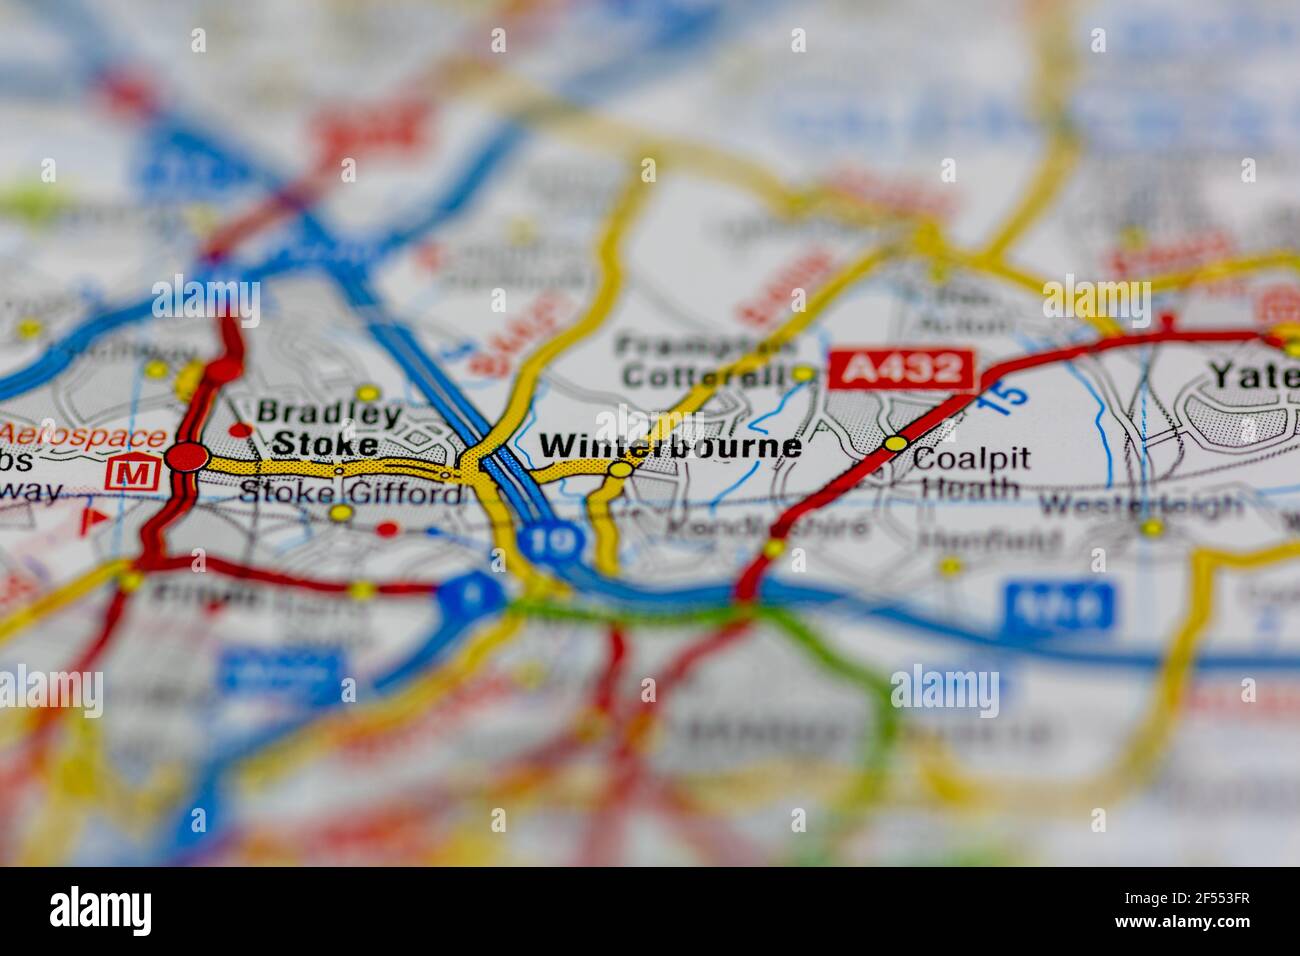 Winterbourne Shown on a Geography map or road map Stock Photo